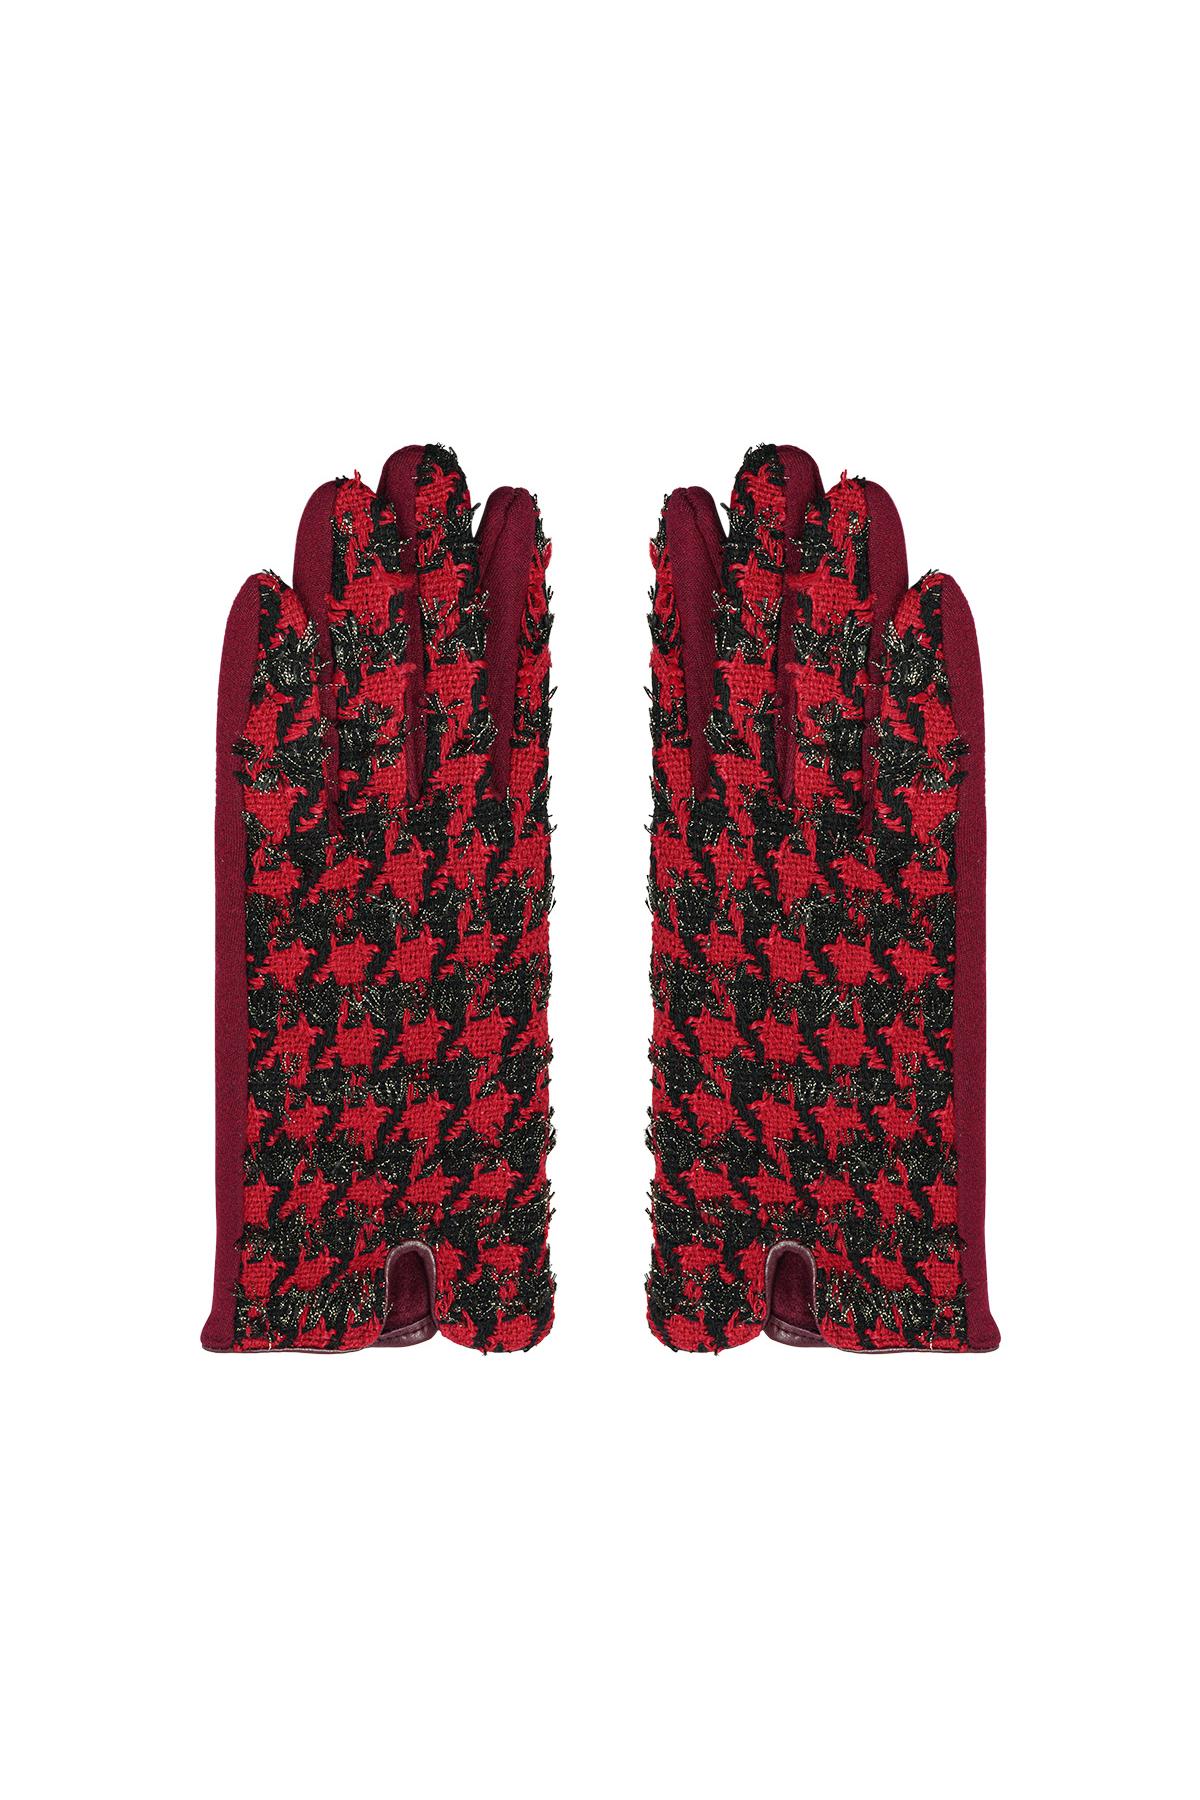 Pied de poule gloves Red Polyester One size h5 